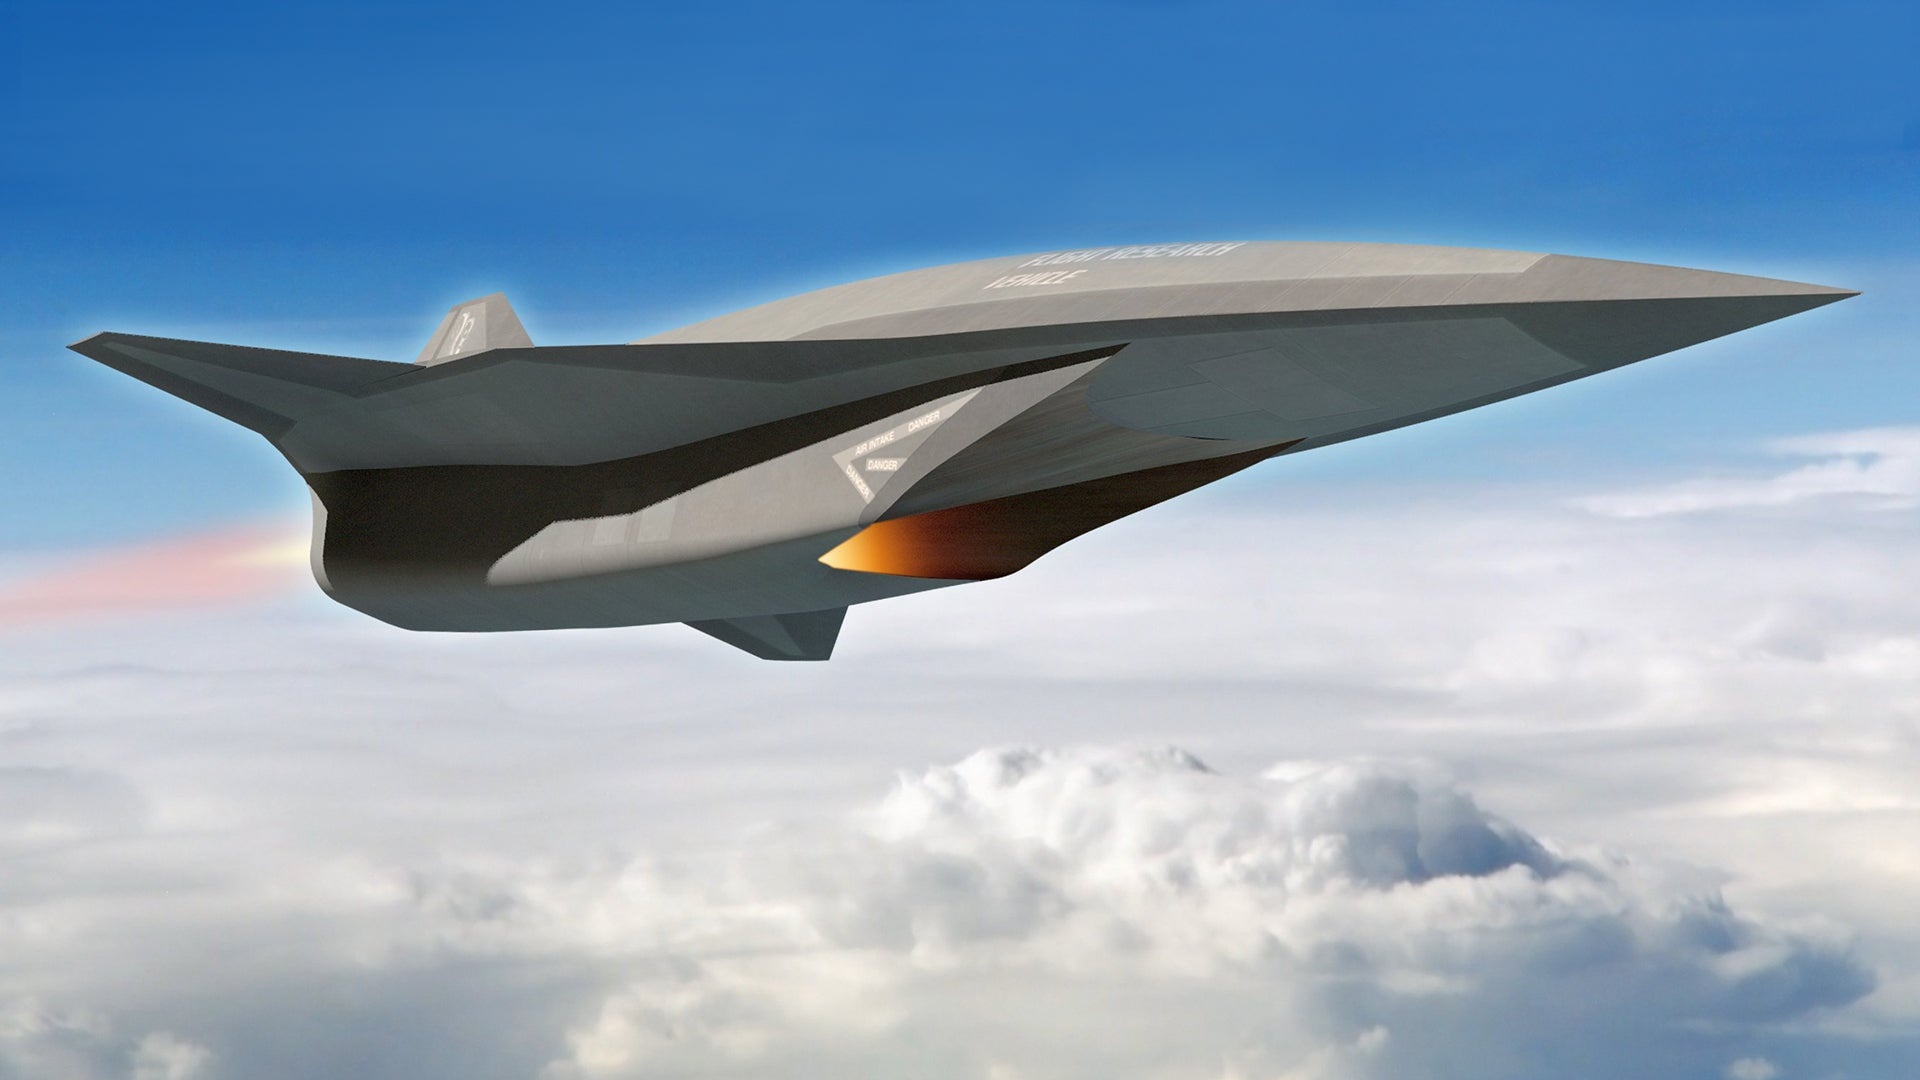 Pilotless planes, Hypersonic strike capability, Air force project, Shadowy project, 1920x1080 Full HD Desktop